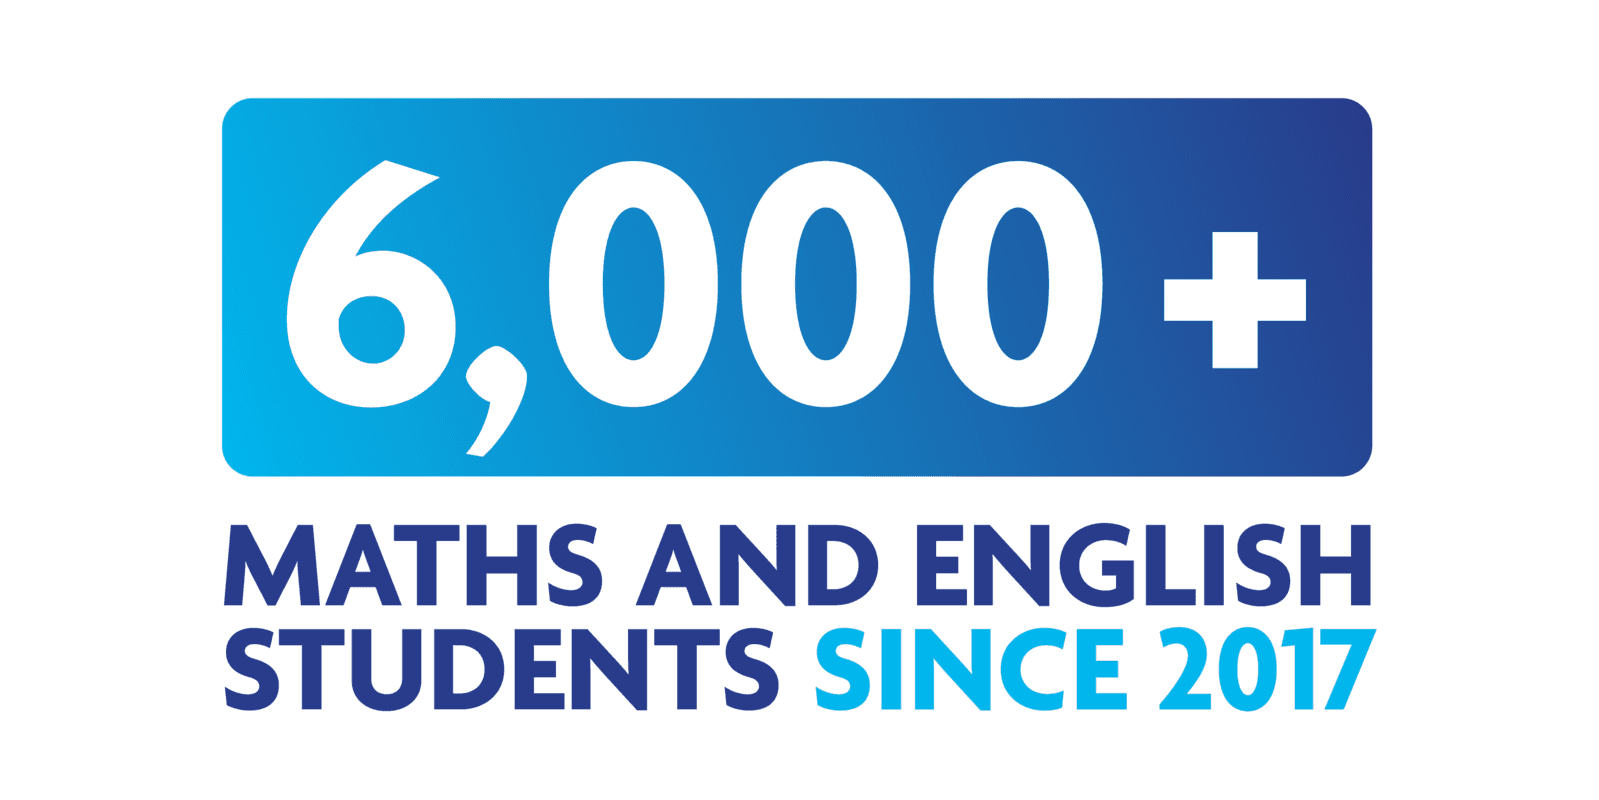 Over 5000 Access Maths and English students since 2017